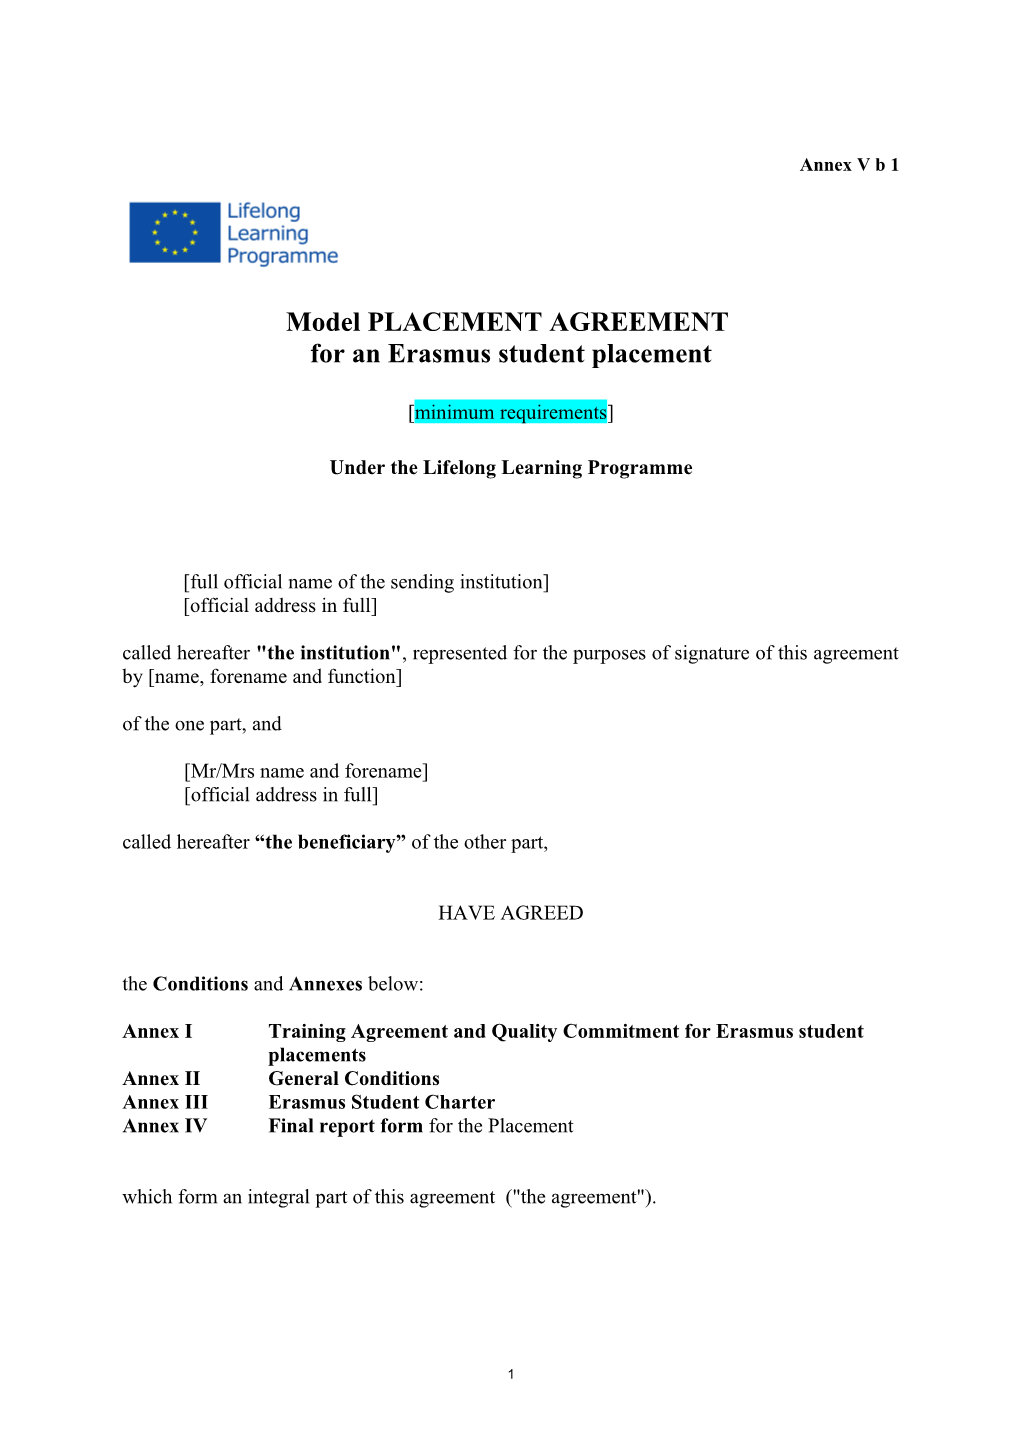 Modelplacement AGREEMENT for an Erasmus Student Placement